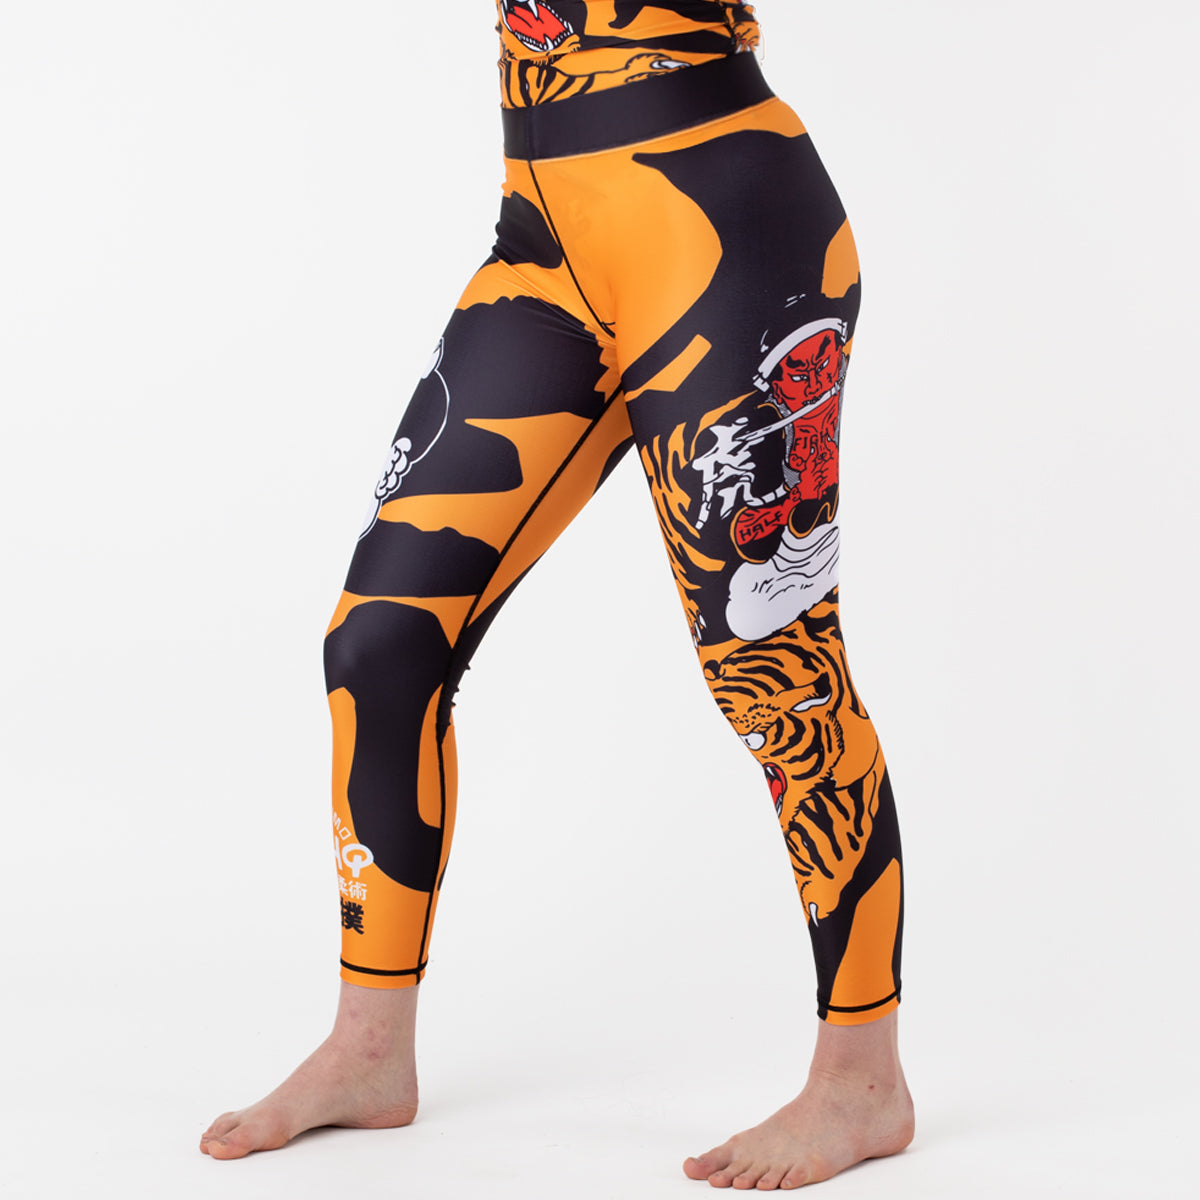 COMBATE Women's Grappling Spats – 93brand